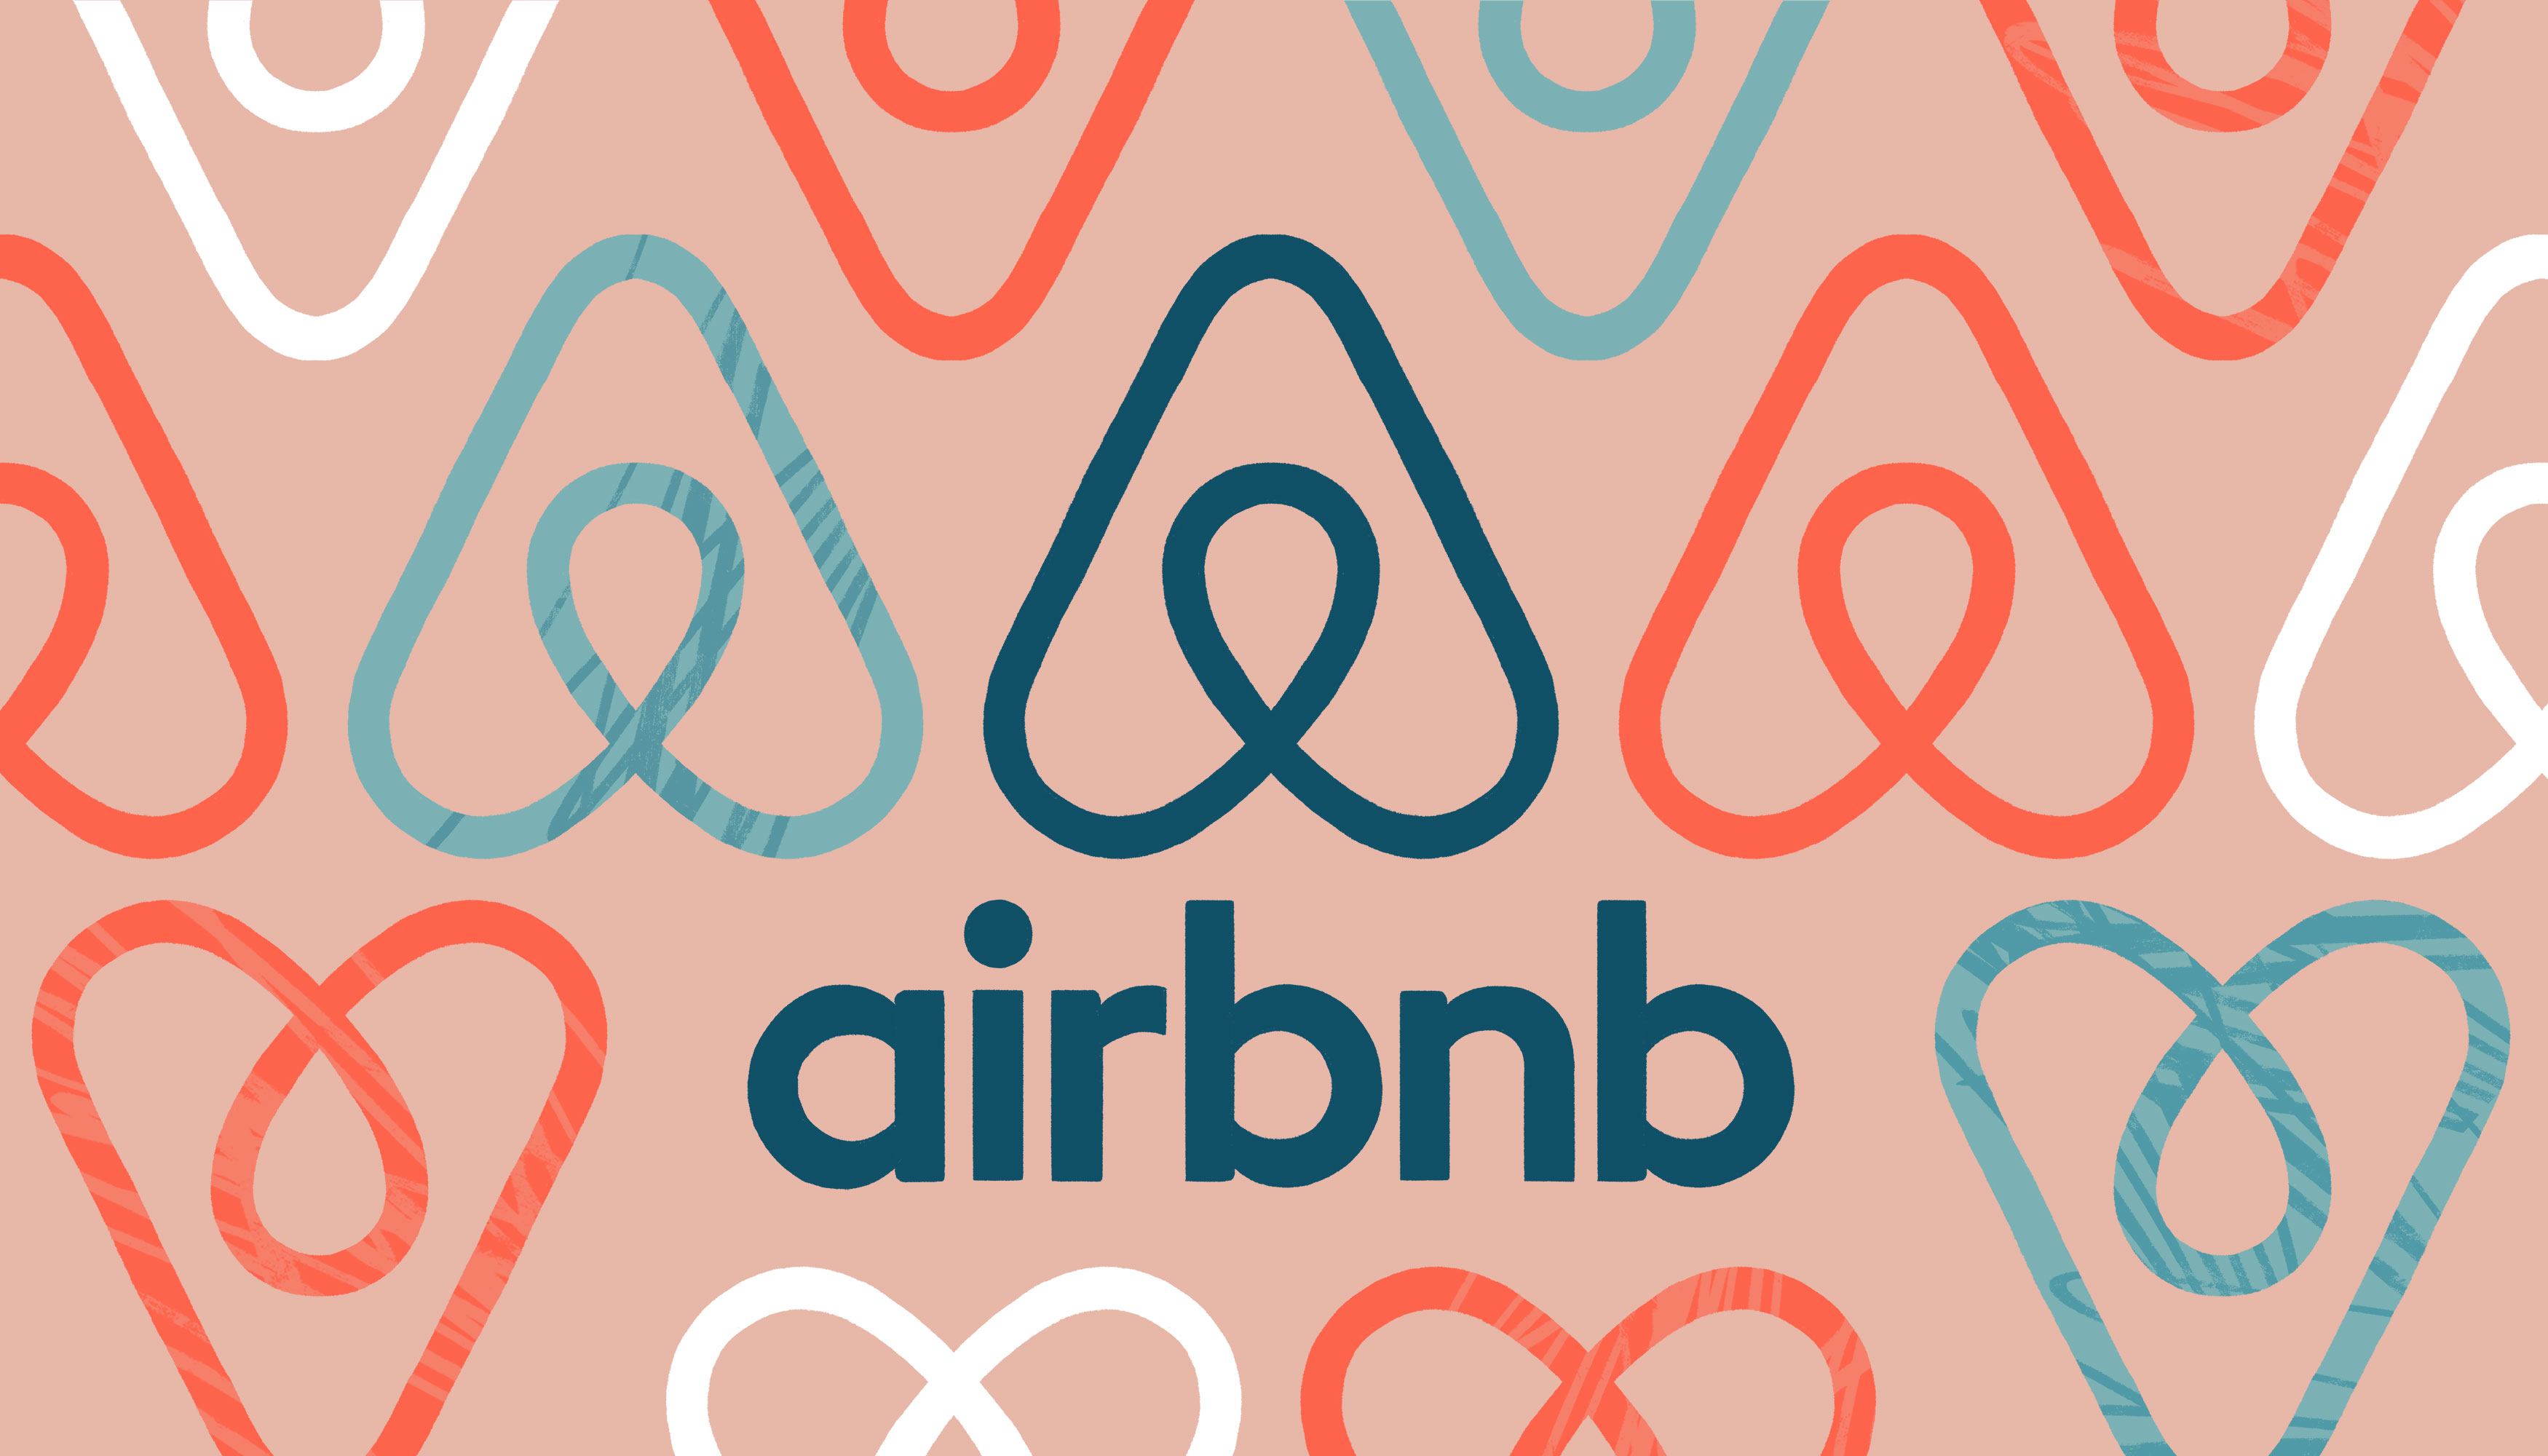 An illustration of Airbnbs logo in multiple colors on a red background.